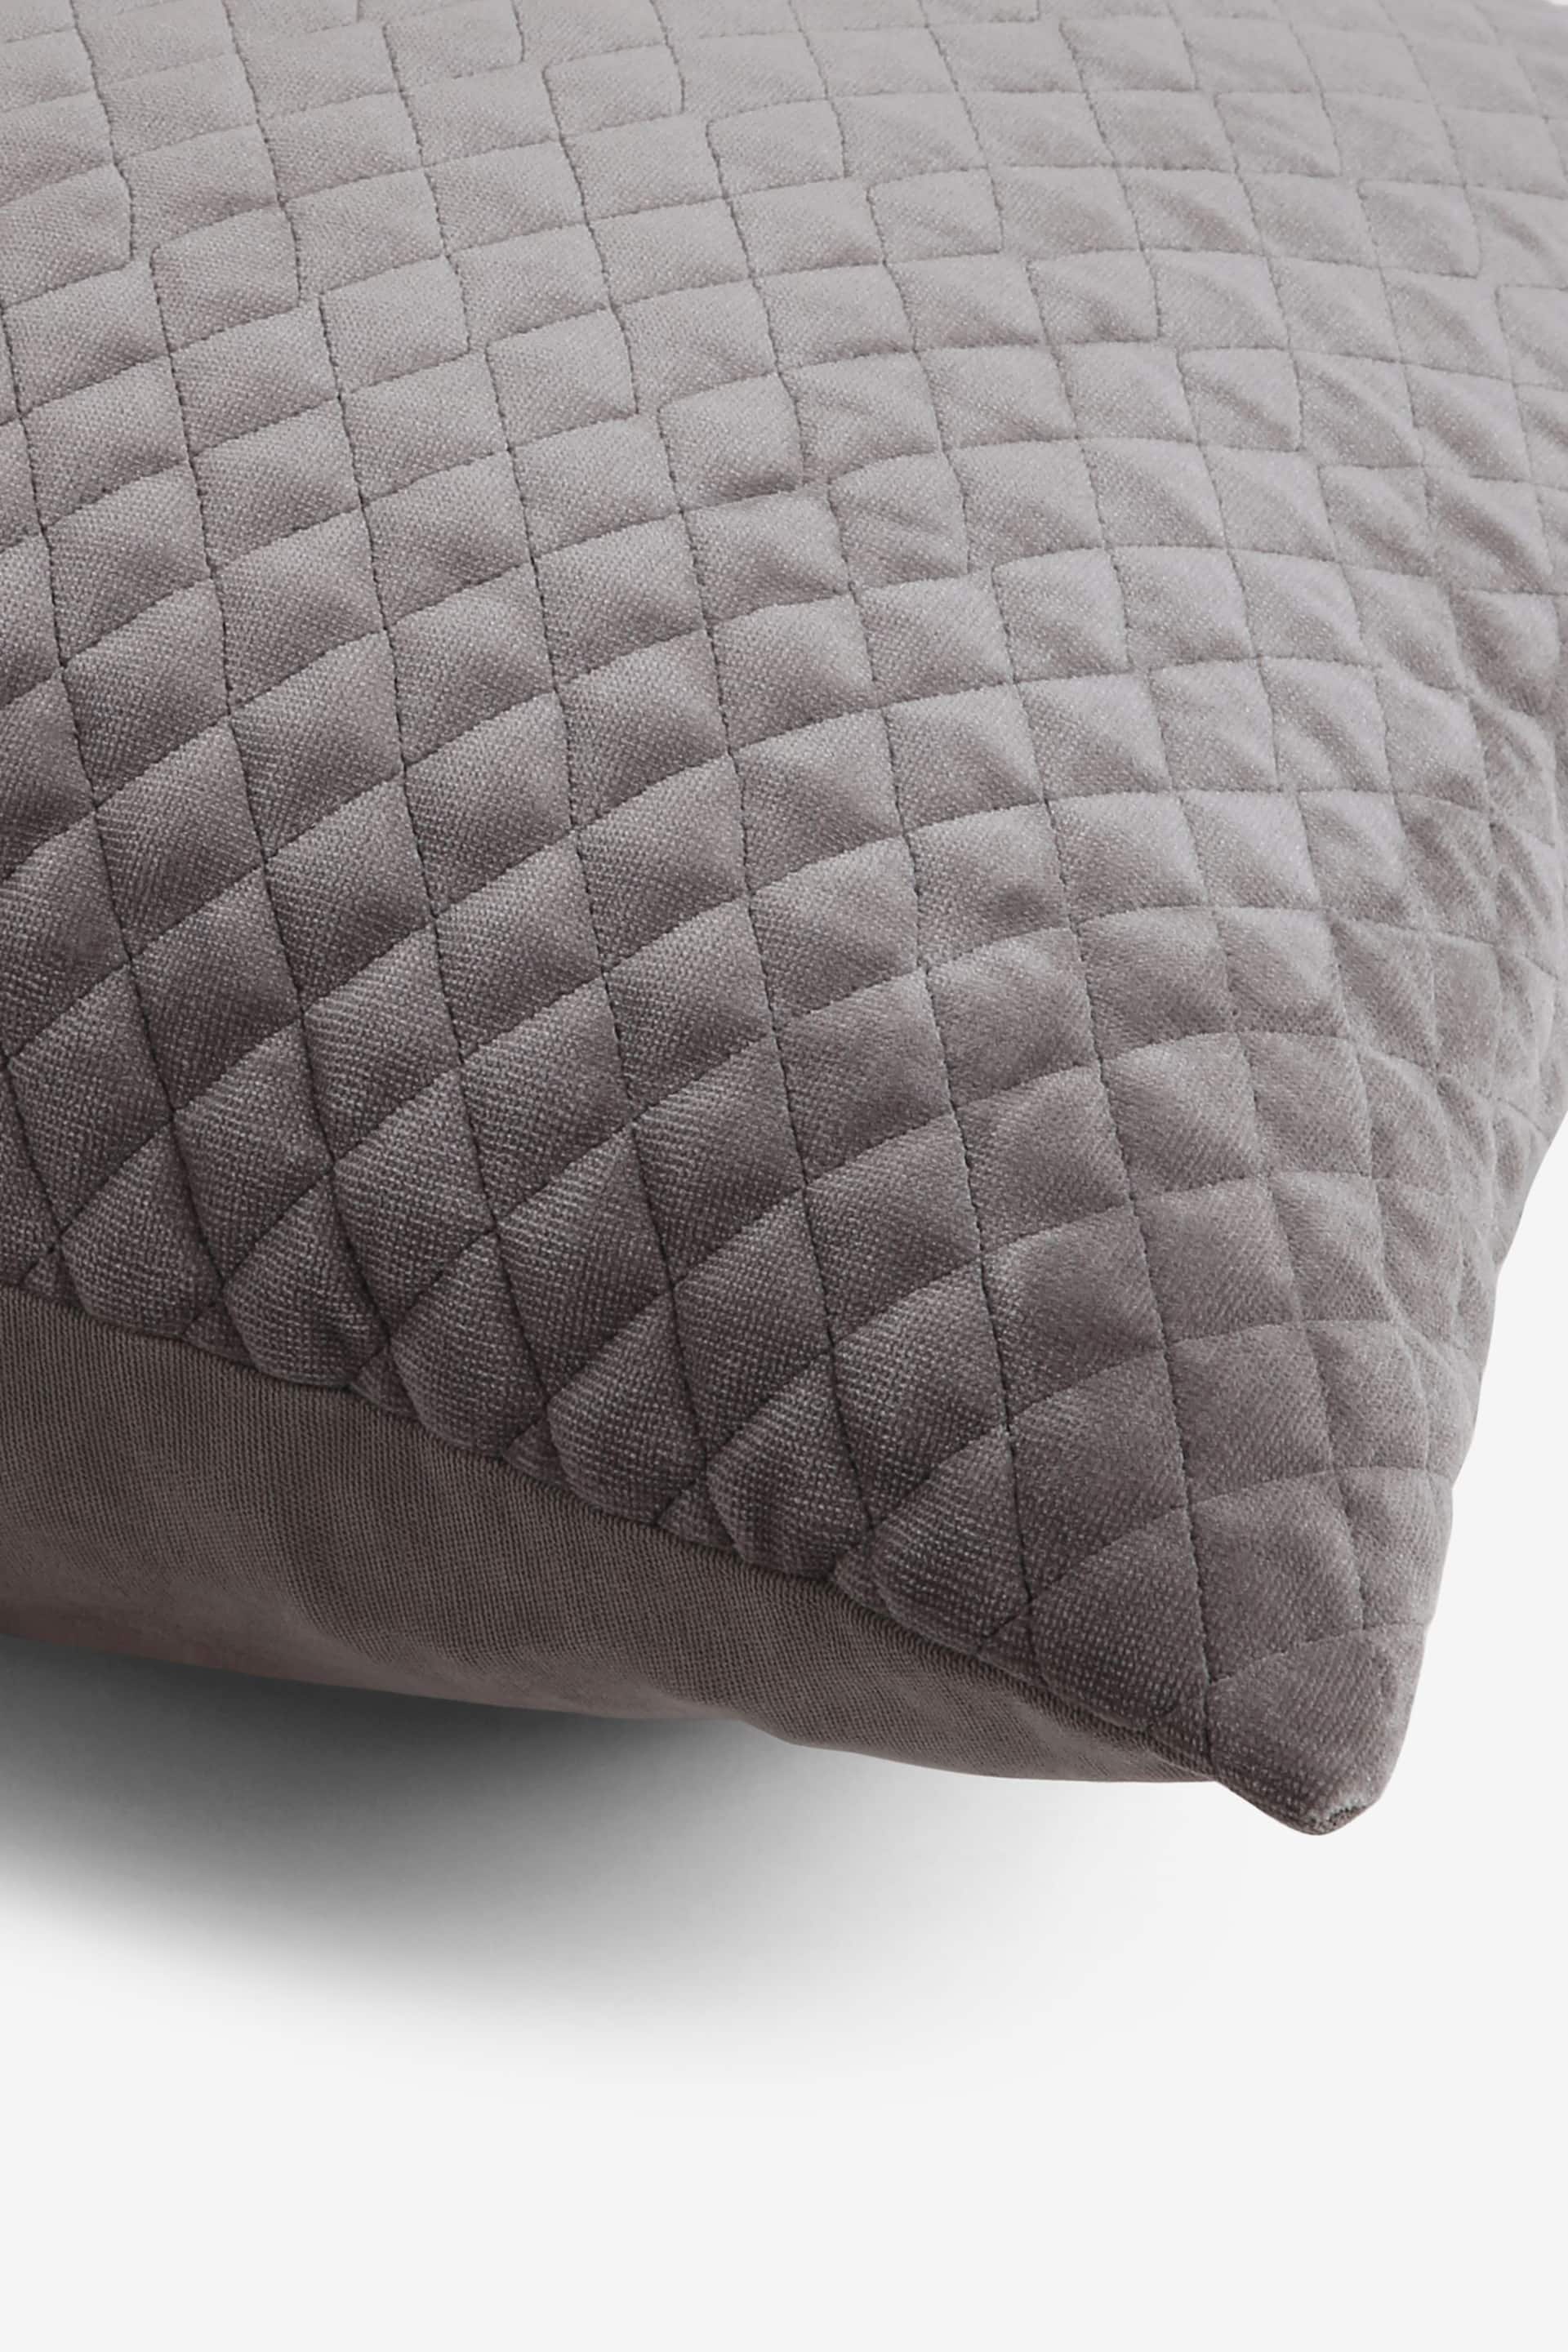 Charcoal Grey Velvet Quilted Hamilton 50 x 50 Cushion - Image 2 of 6